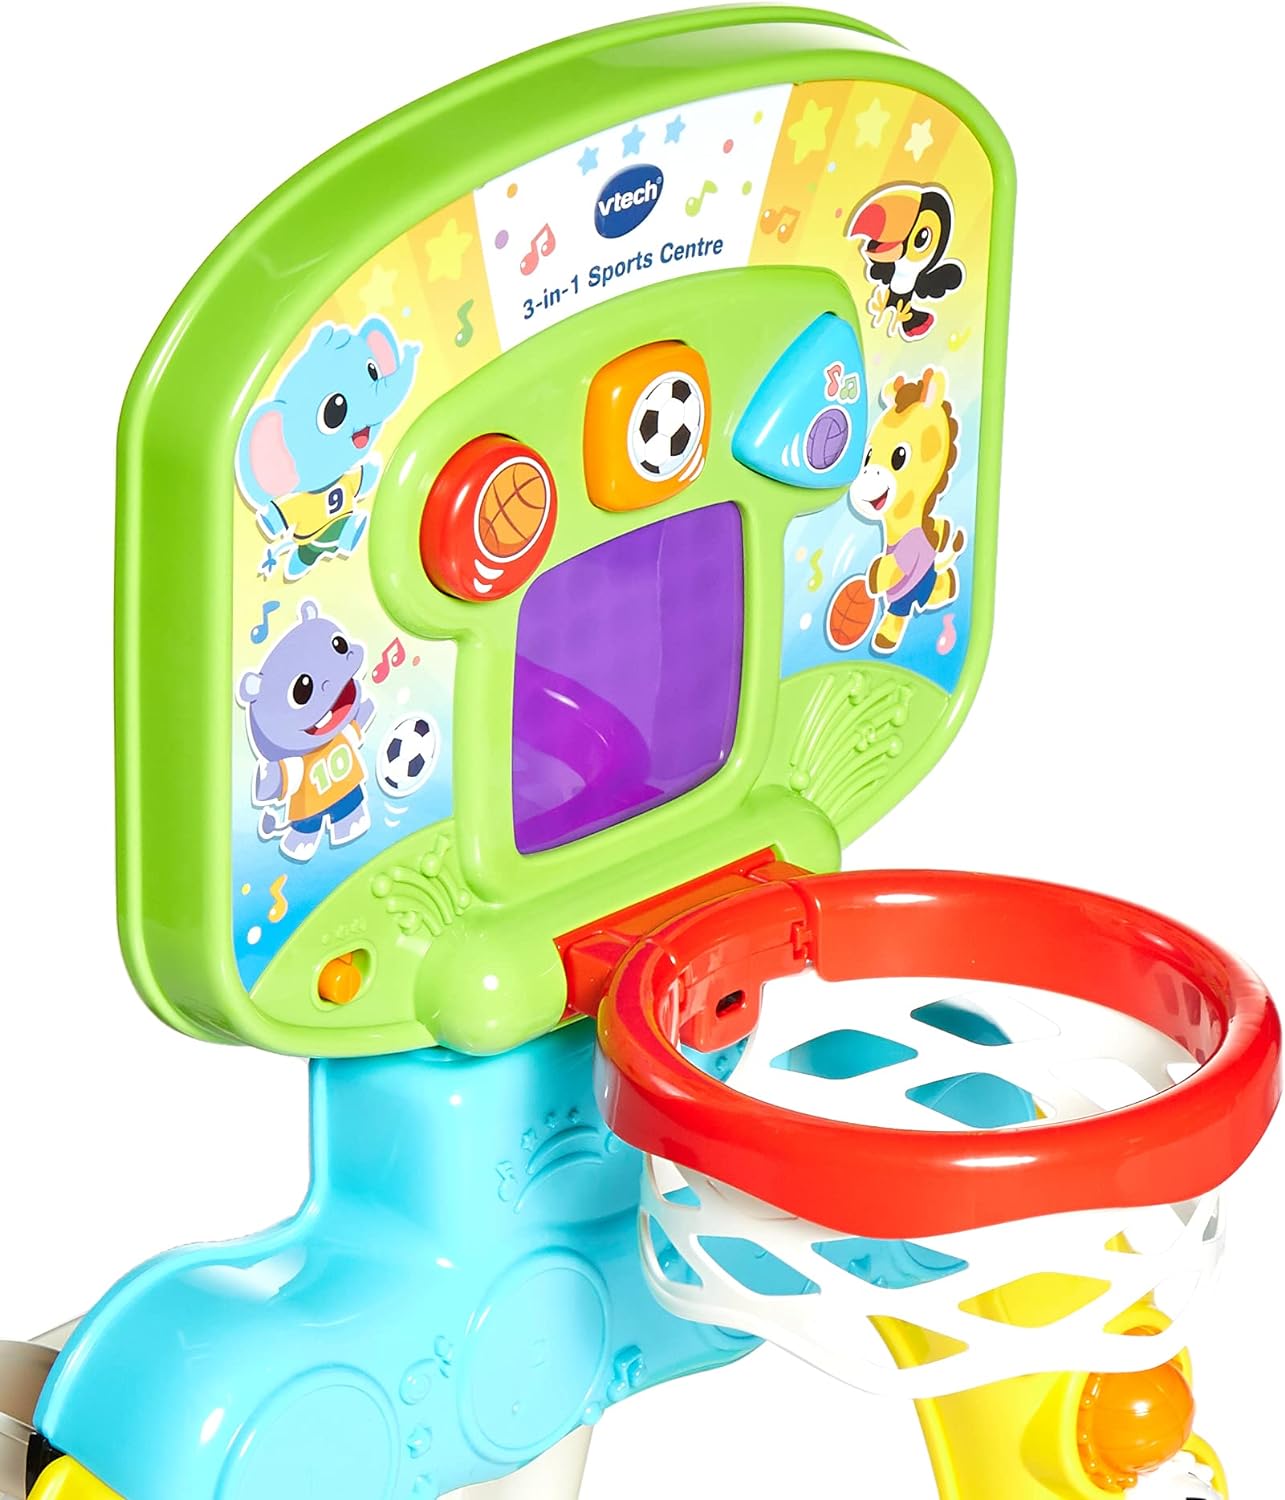 VTech 3-in-1 Sports Centre, Baby Interactive Toy with Colours and Sounds, Educational Games for Kids, Learning Toys with Role-Play, Suitable for Baby Boys and Girls from 12 to 36 Months (Yellow\/Blue)